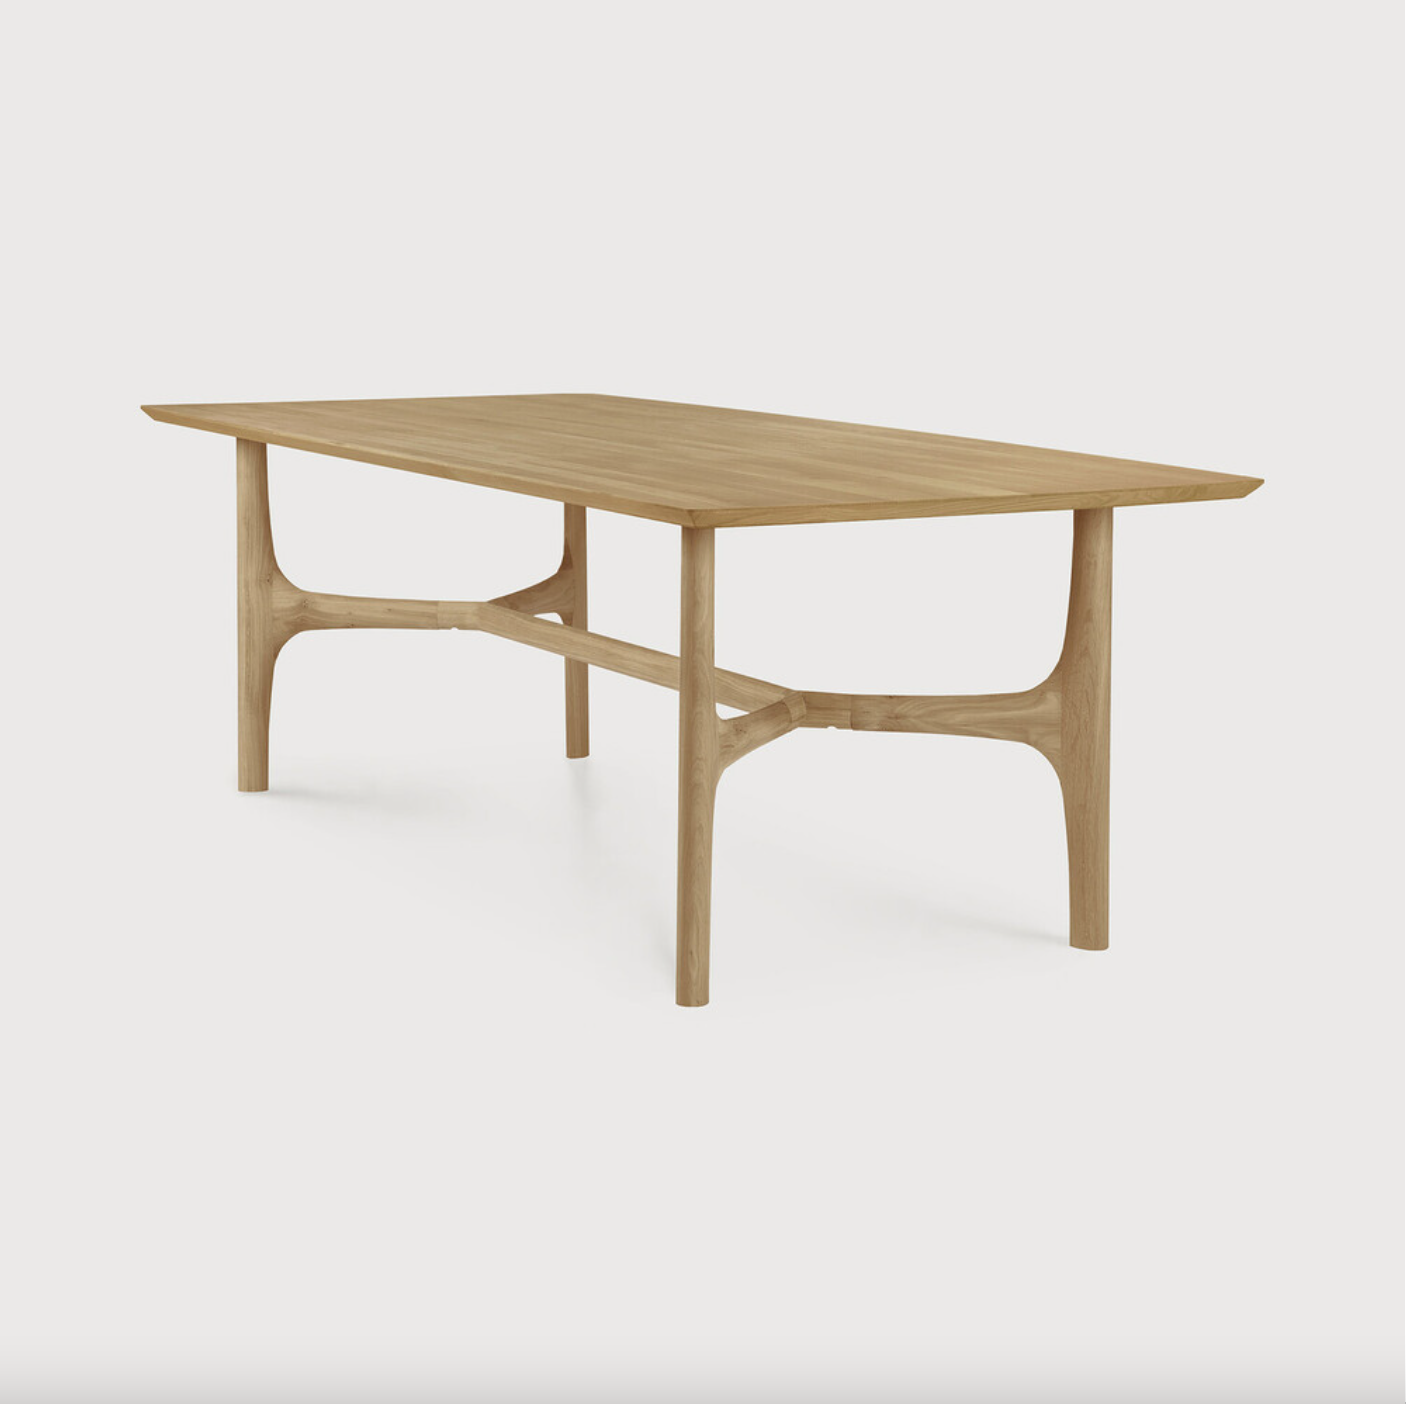 The Nexus dining table, designed by Alain van Havre, is brought to life by creating flow and movement. We love the soft, rounded edges of the table base contrasted with the knife edge top. This table is sure to elevate the feel of your dining space while remaining organic and cozy!  Dimensions: 83"w x 39.5"d x 30"h  Weight: 130 lbs  Dimensions: 91"w x 41.5"d x 30"h Weight: 150 lbs  Material: Oak, 100% solid wood Finish: Oiled